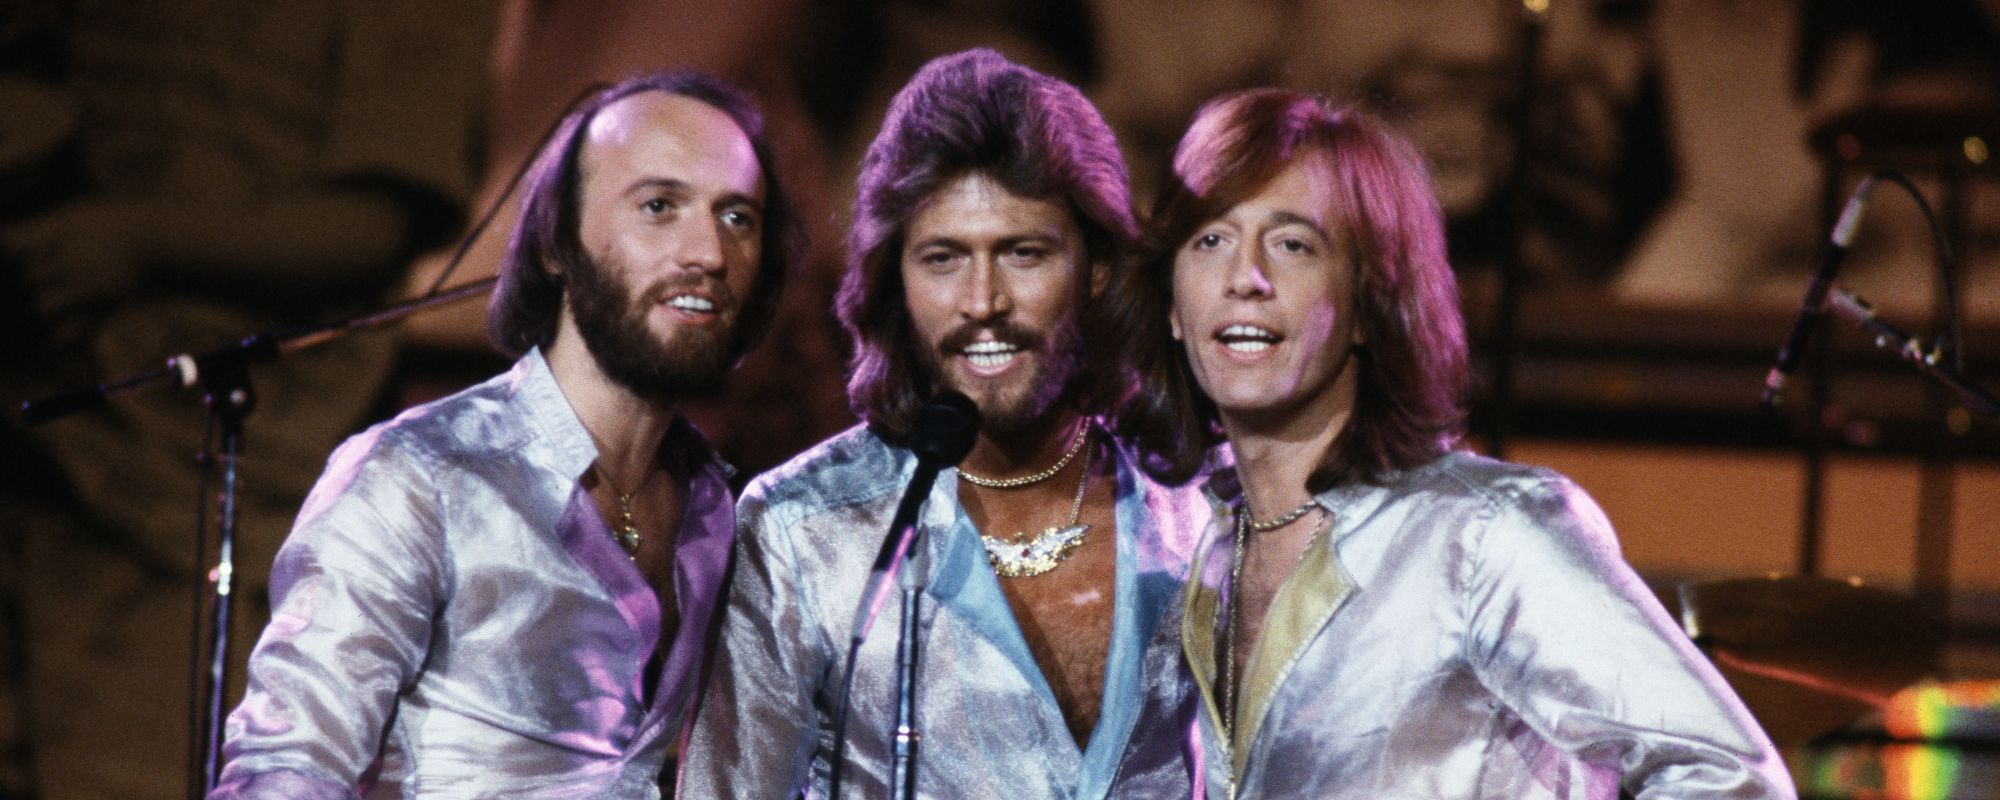 7 Songs That Defined the ’70s